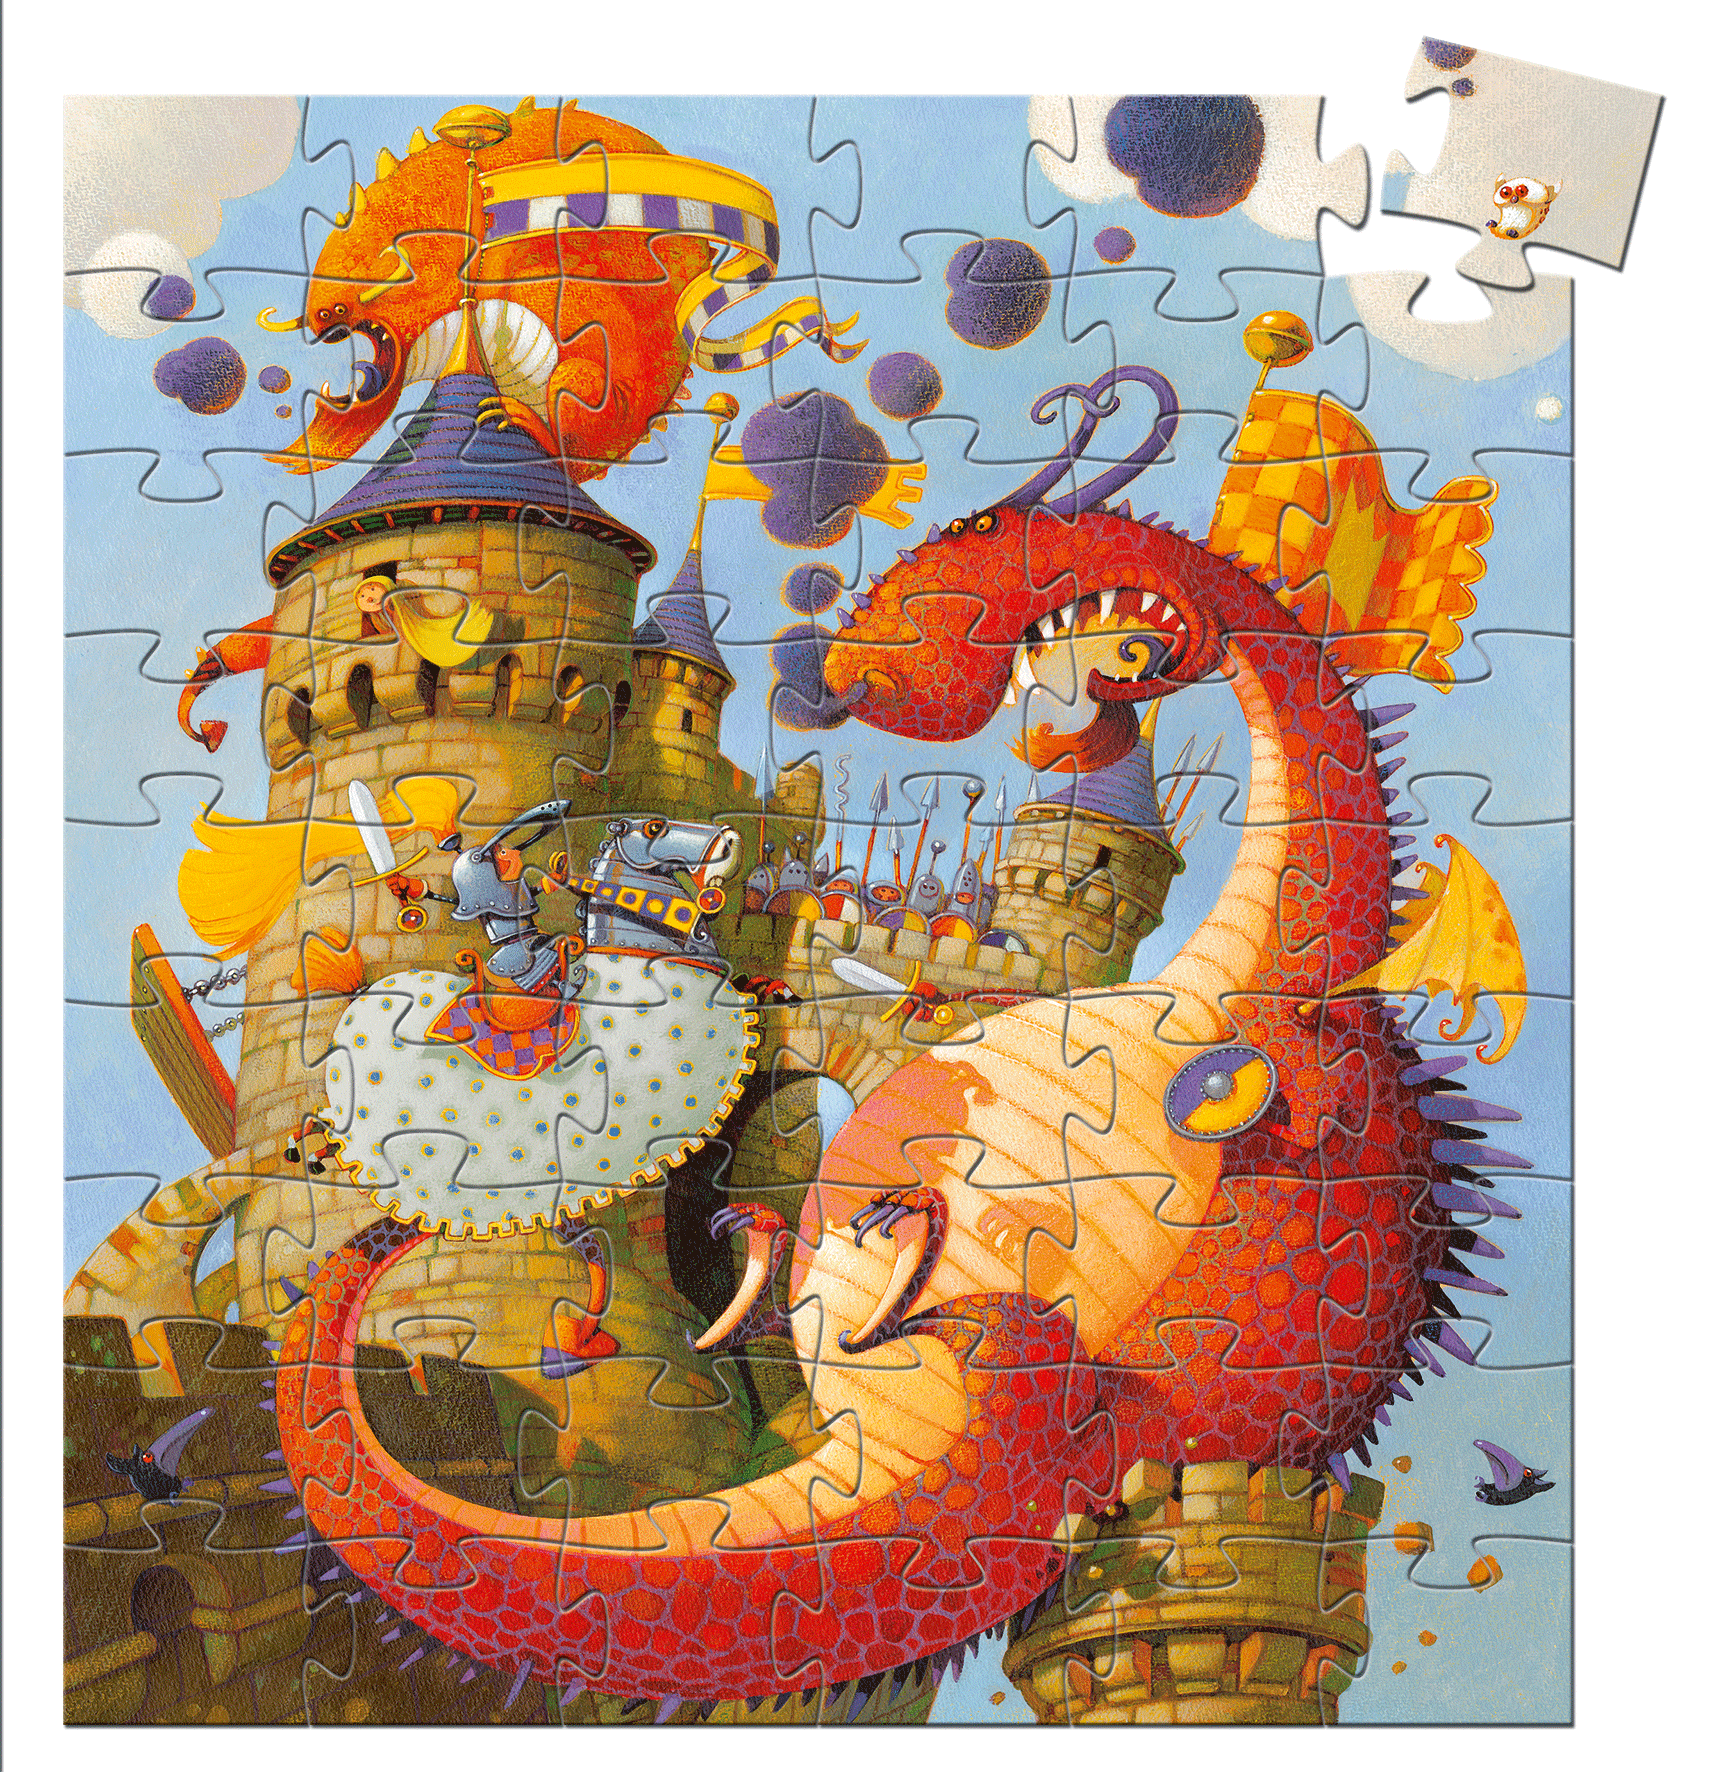 Djeco Silhouette Puzzles Vaillant And The Dragon - Why and Whale